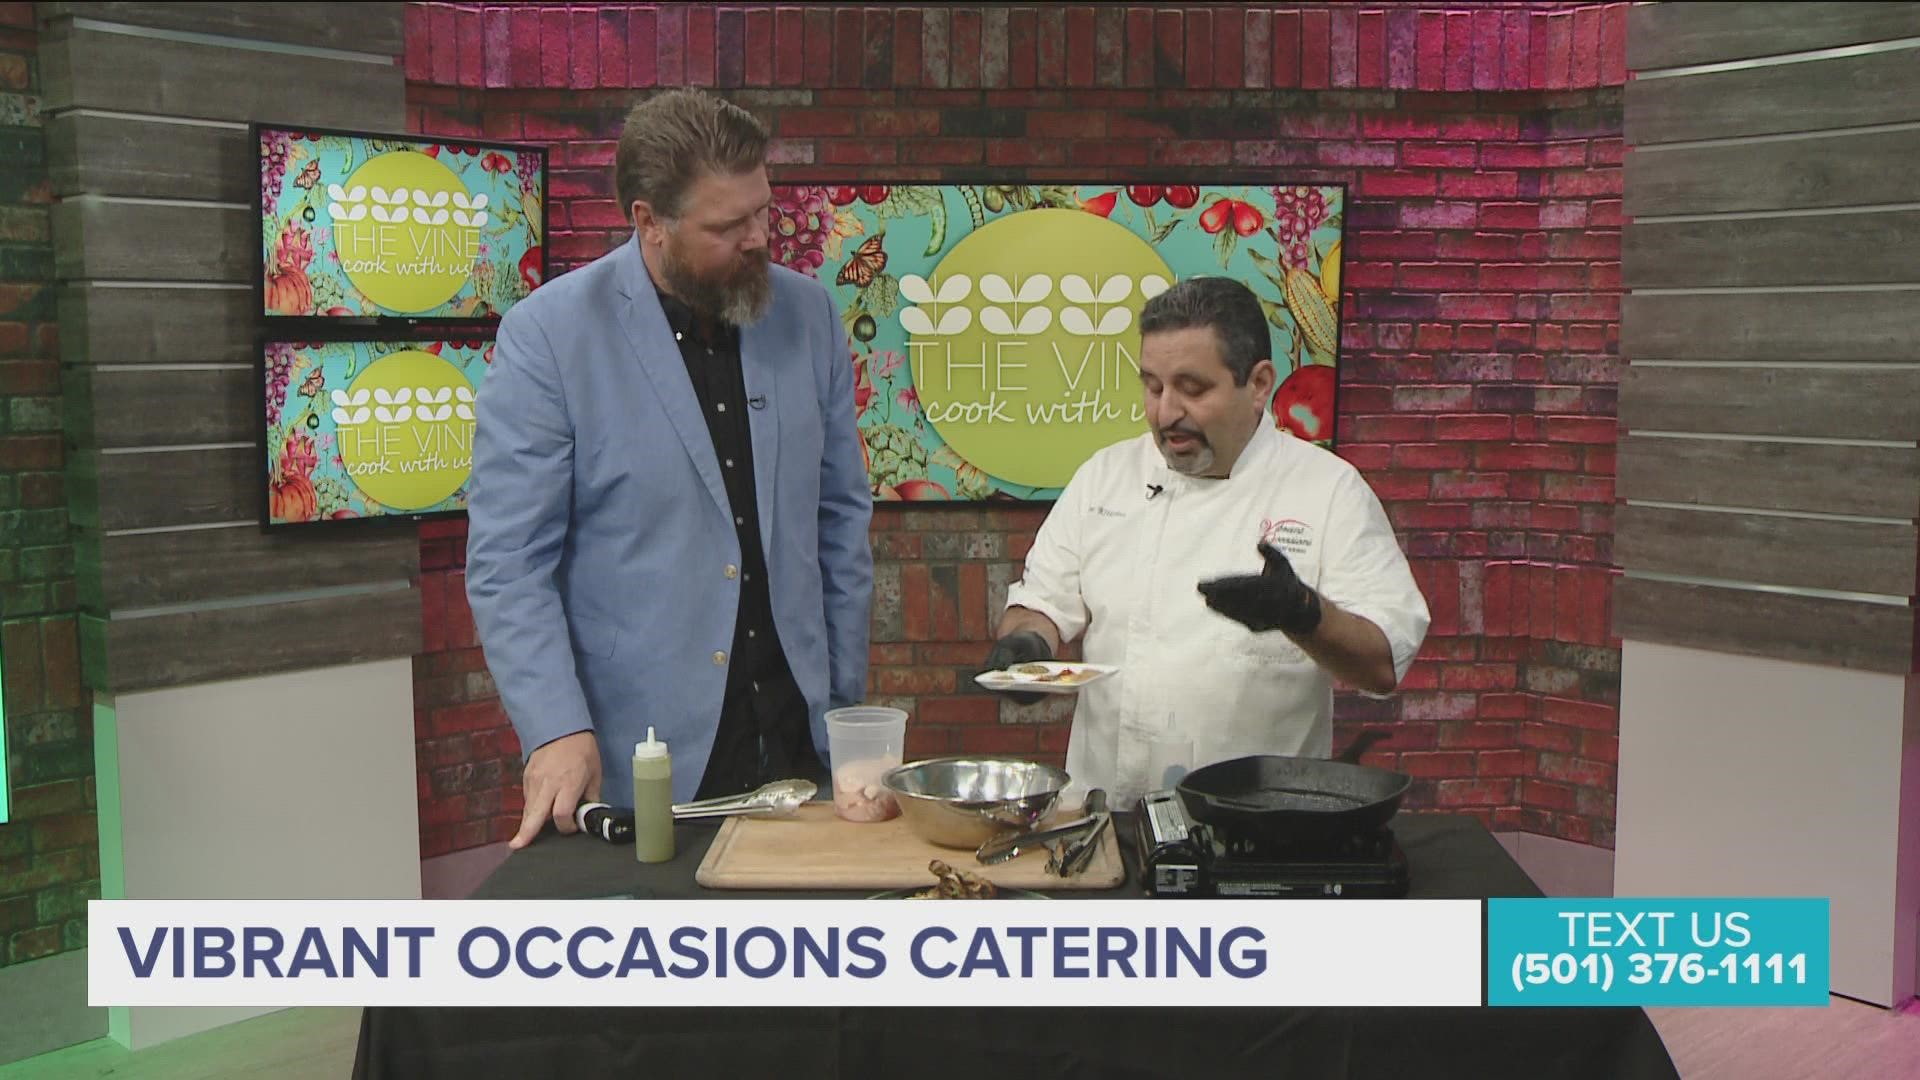 Chef Serge with Vibrant Catering stopped by the studio to whip up something delicious for Adam and Ashley